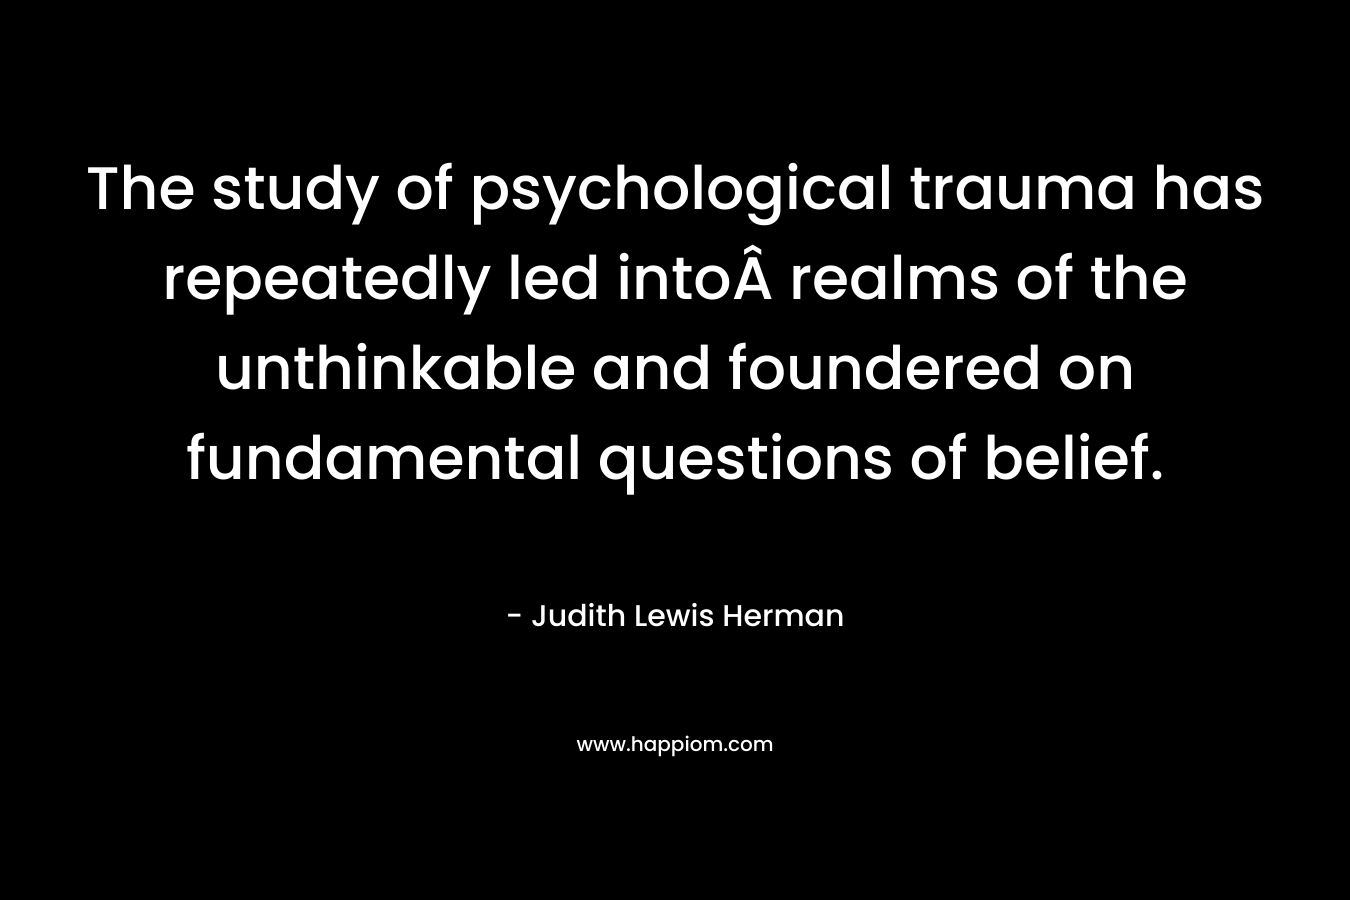 The study of psychological trauma has repeatedly led intoÂ realms of the unthinkable and foundered on fundamental questions of belief.